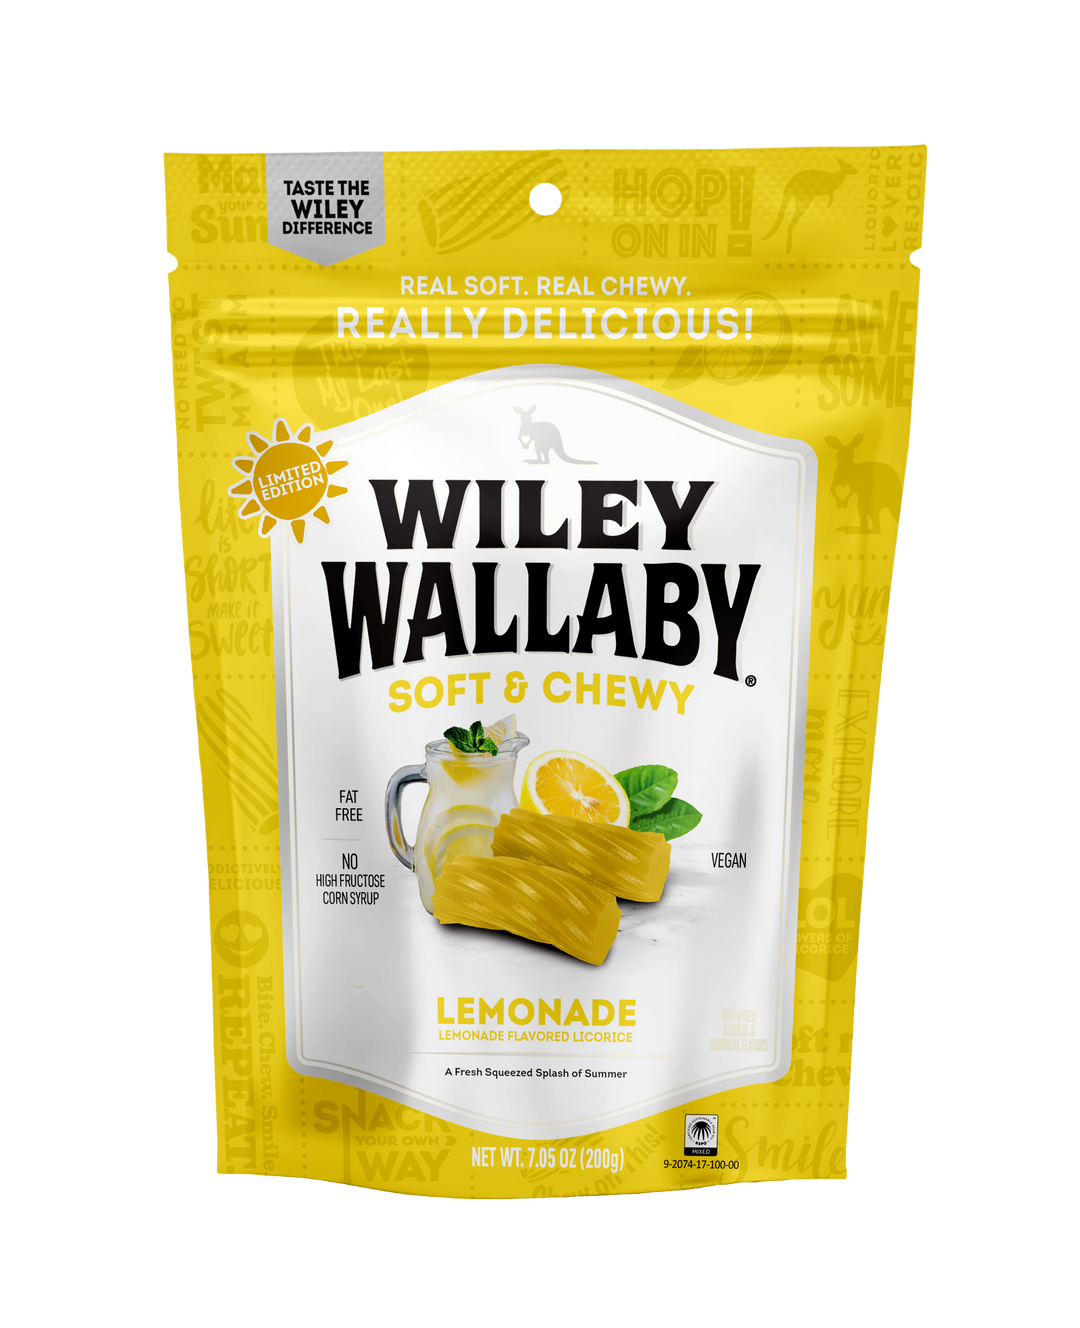 Wiley Wallaby Lemonade Licorice Display Shipper-48 Count-1/Case